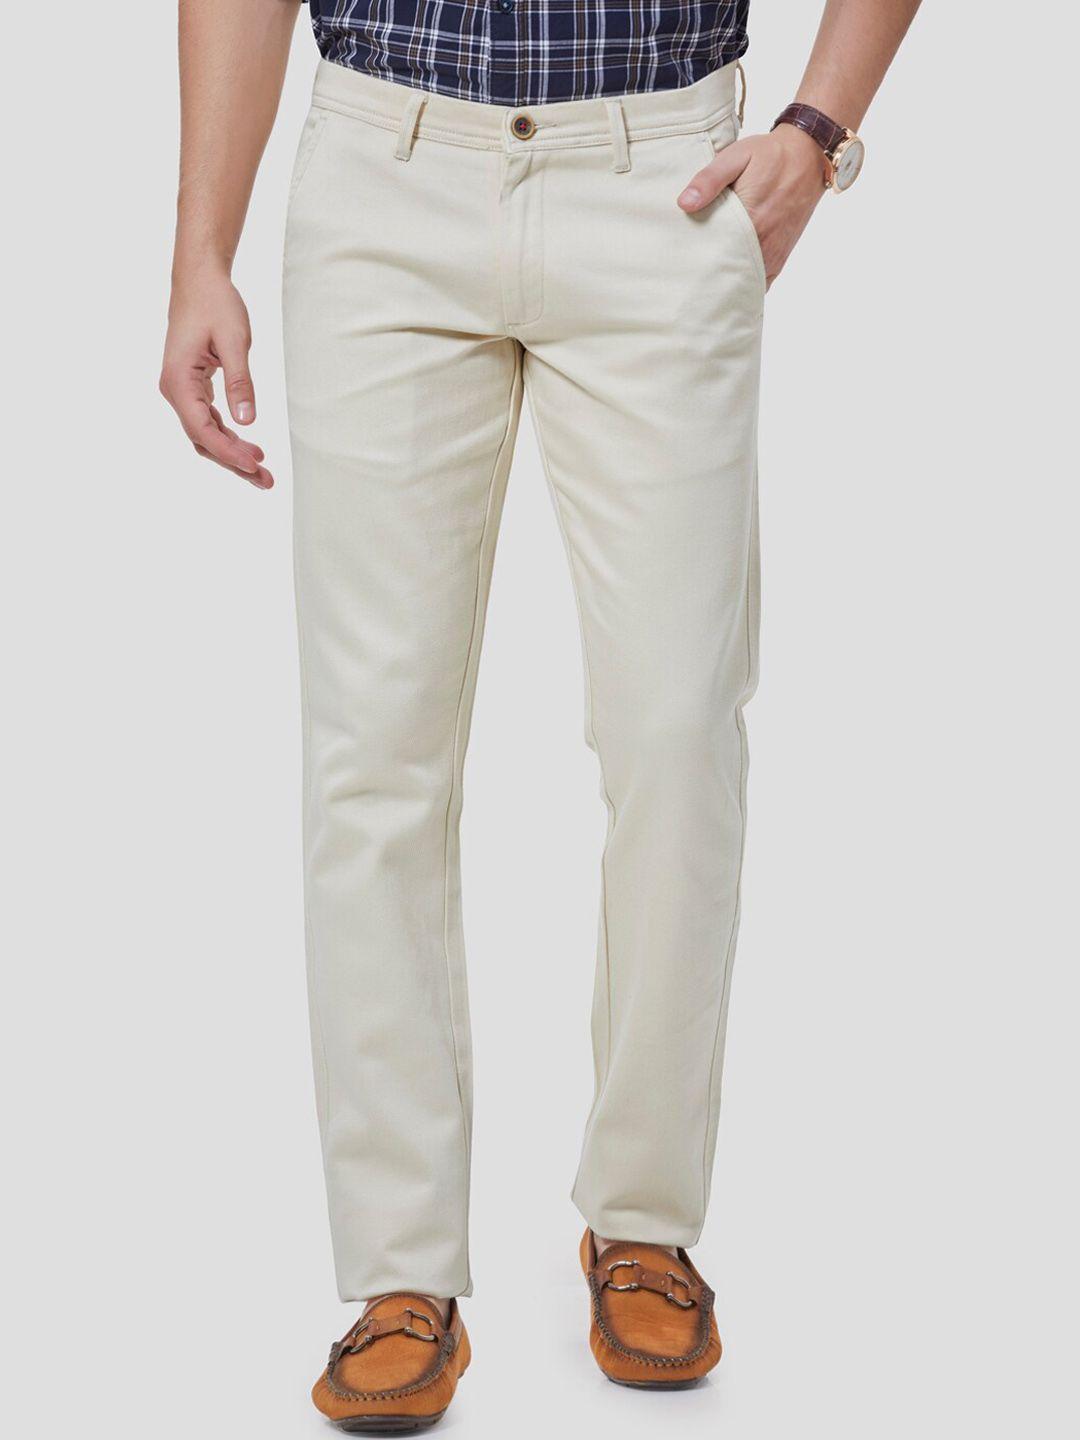 oxemberg men cream-coloured smart slim fit chinos trousers